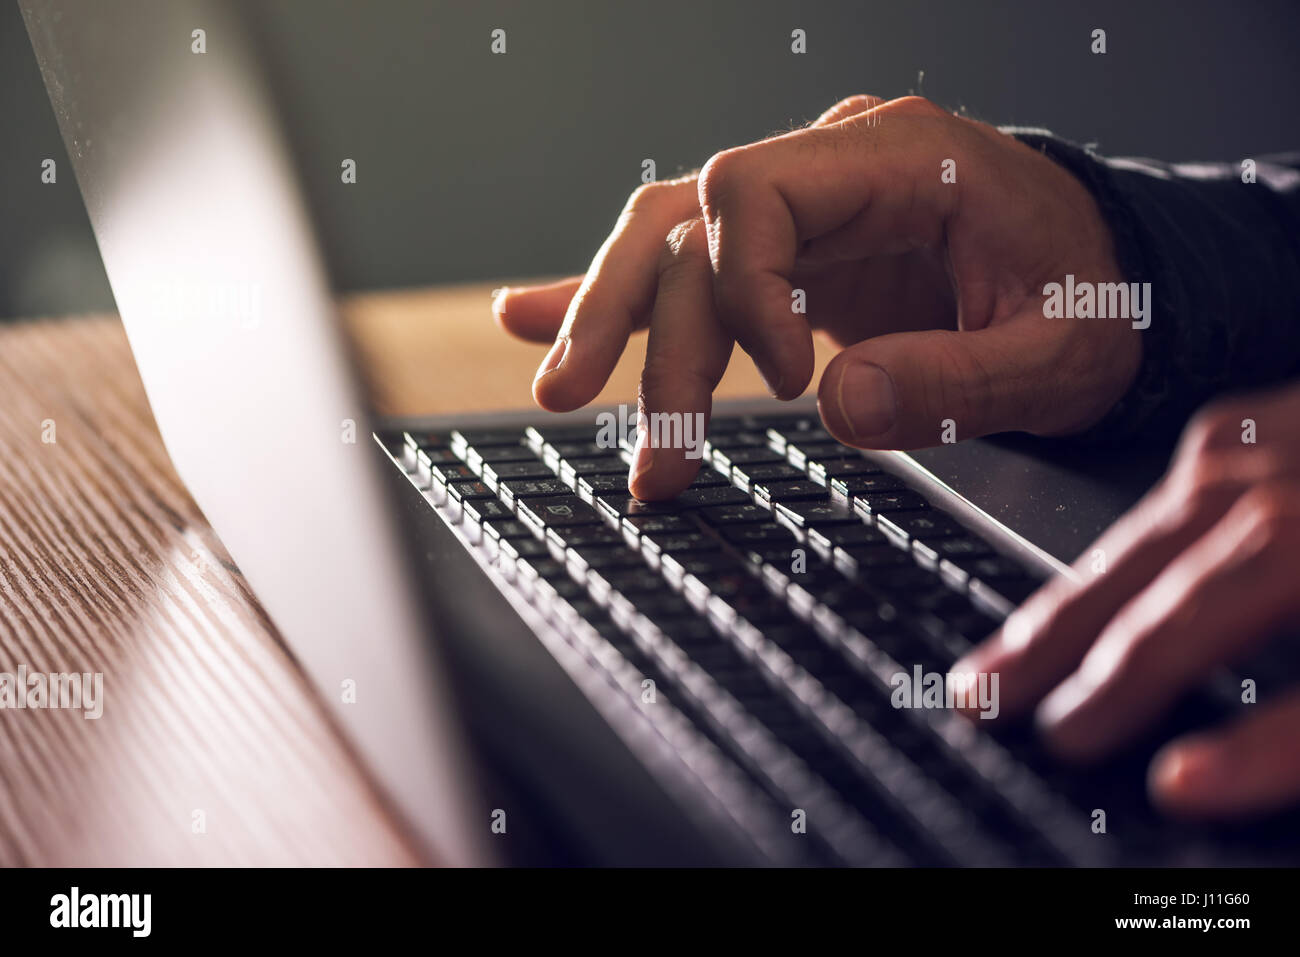 Computer programmer and hacker hands typing laptop keyboard, close up low key with selective focus Stock Photo